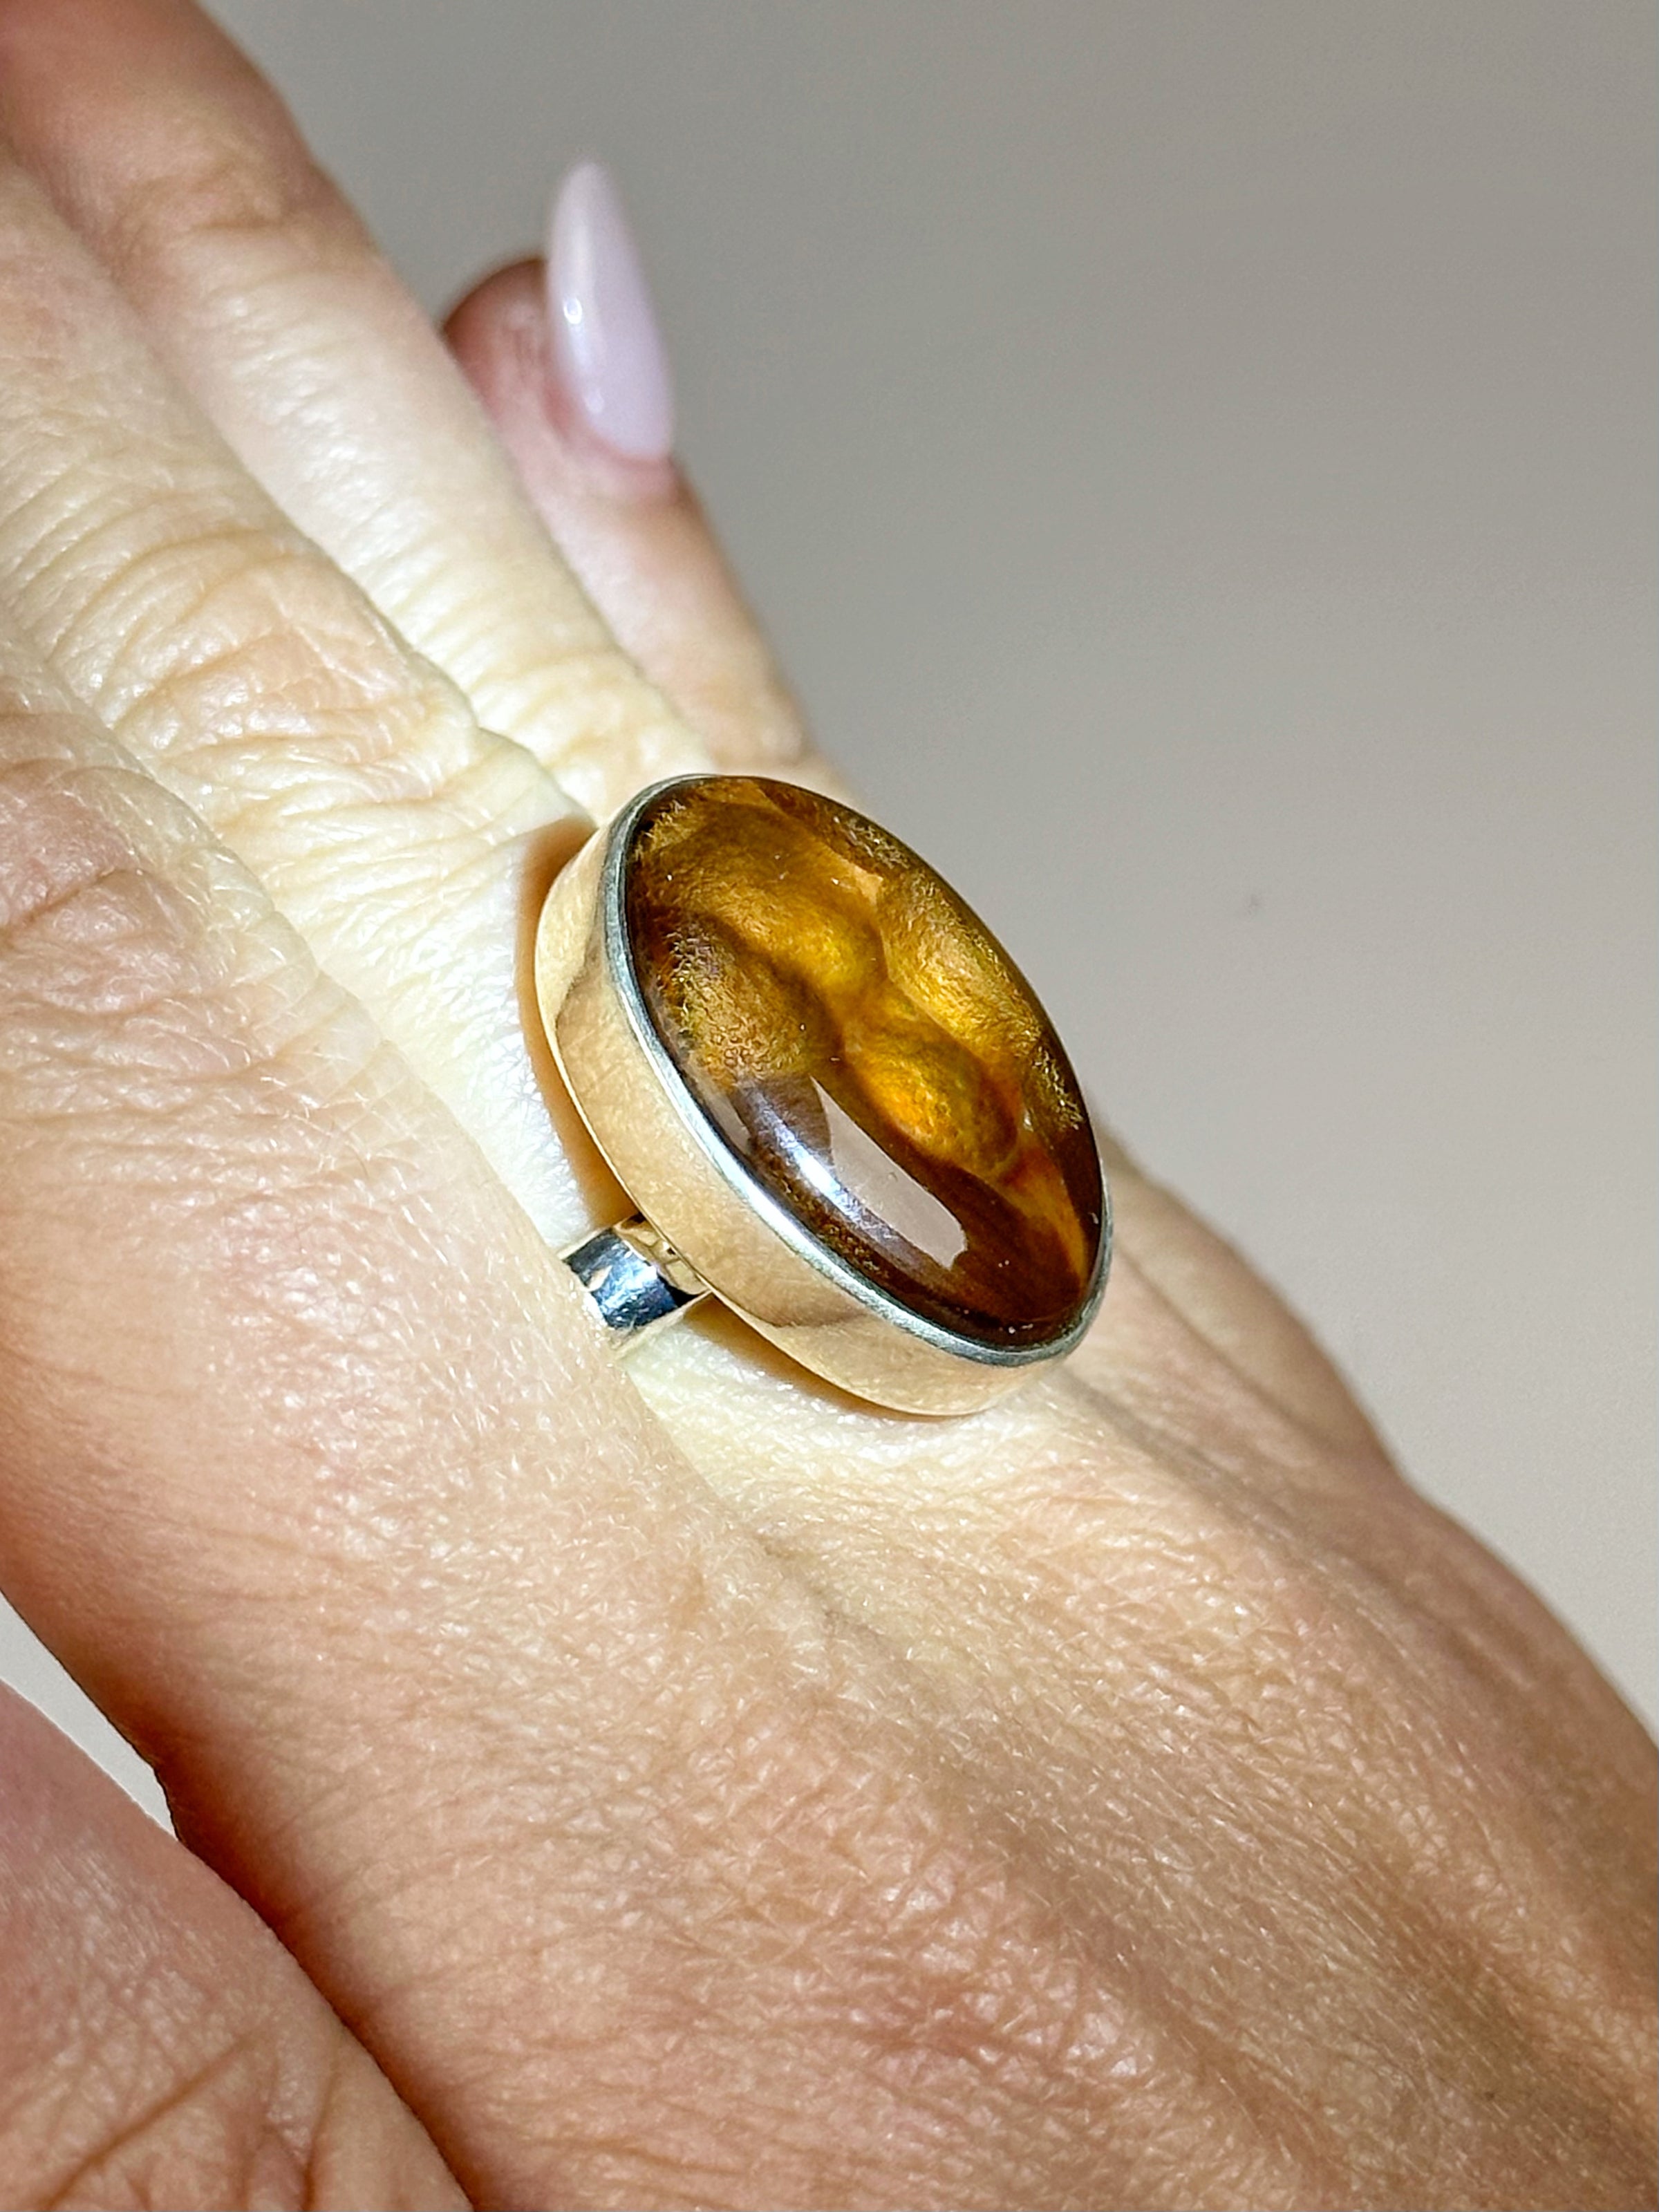 Fire Agate Ring - #1